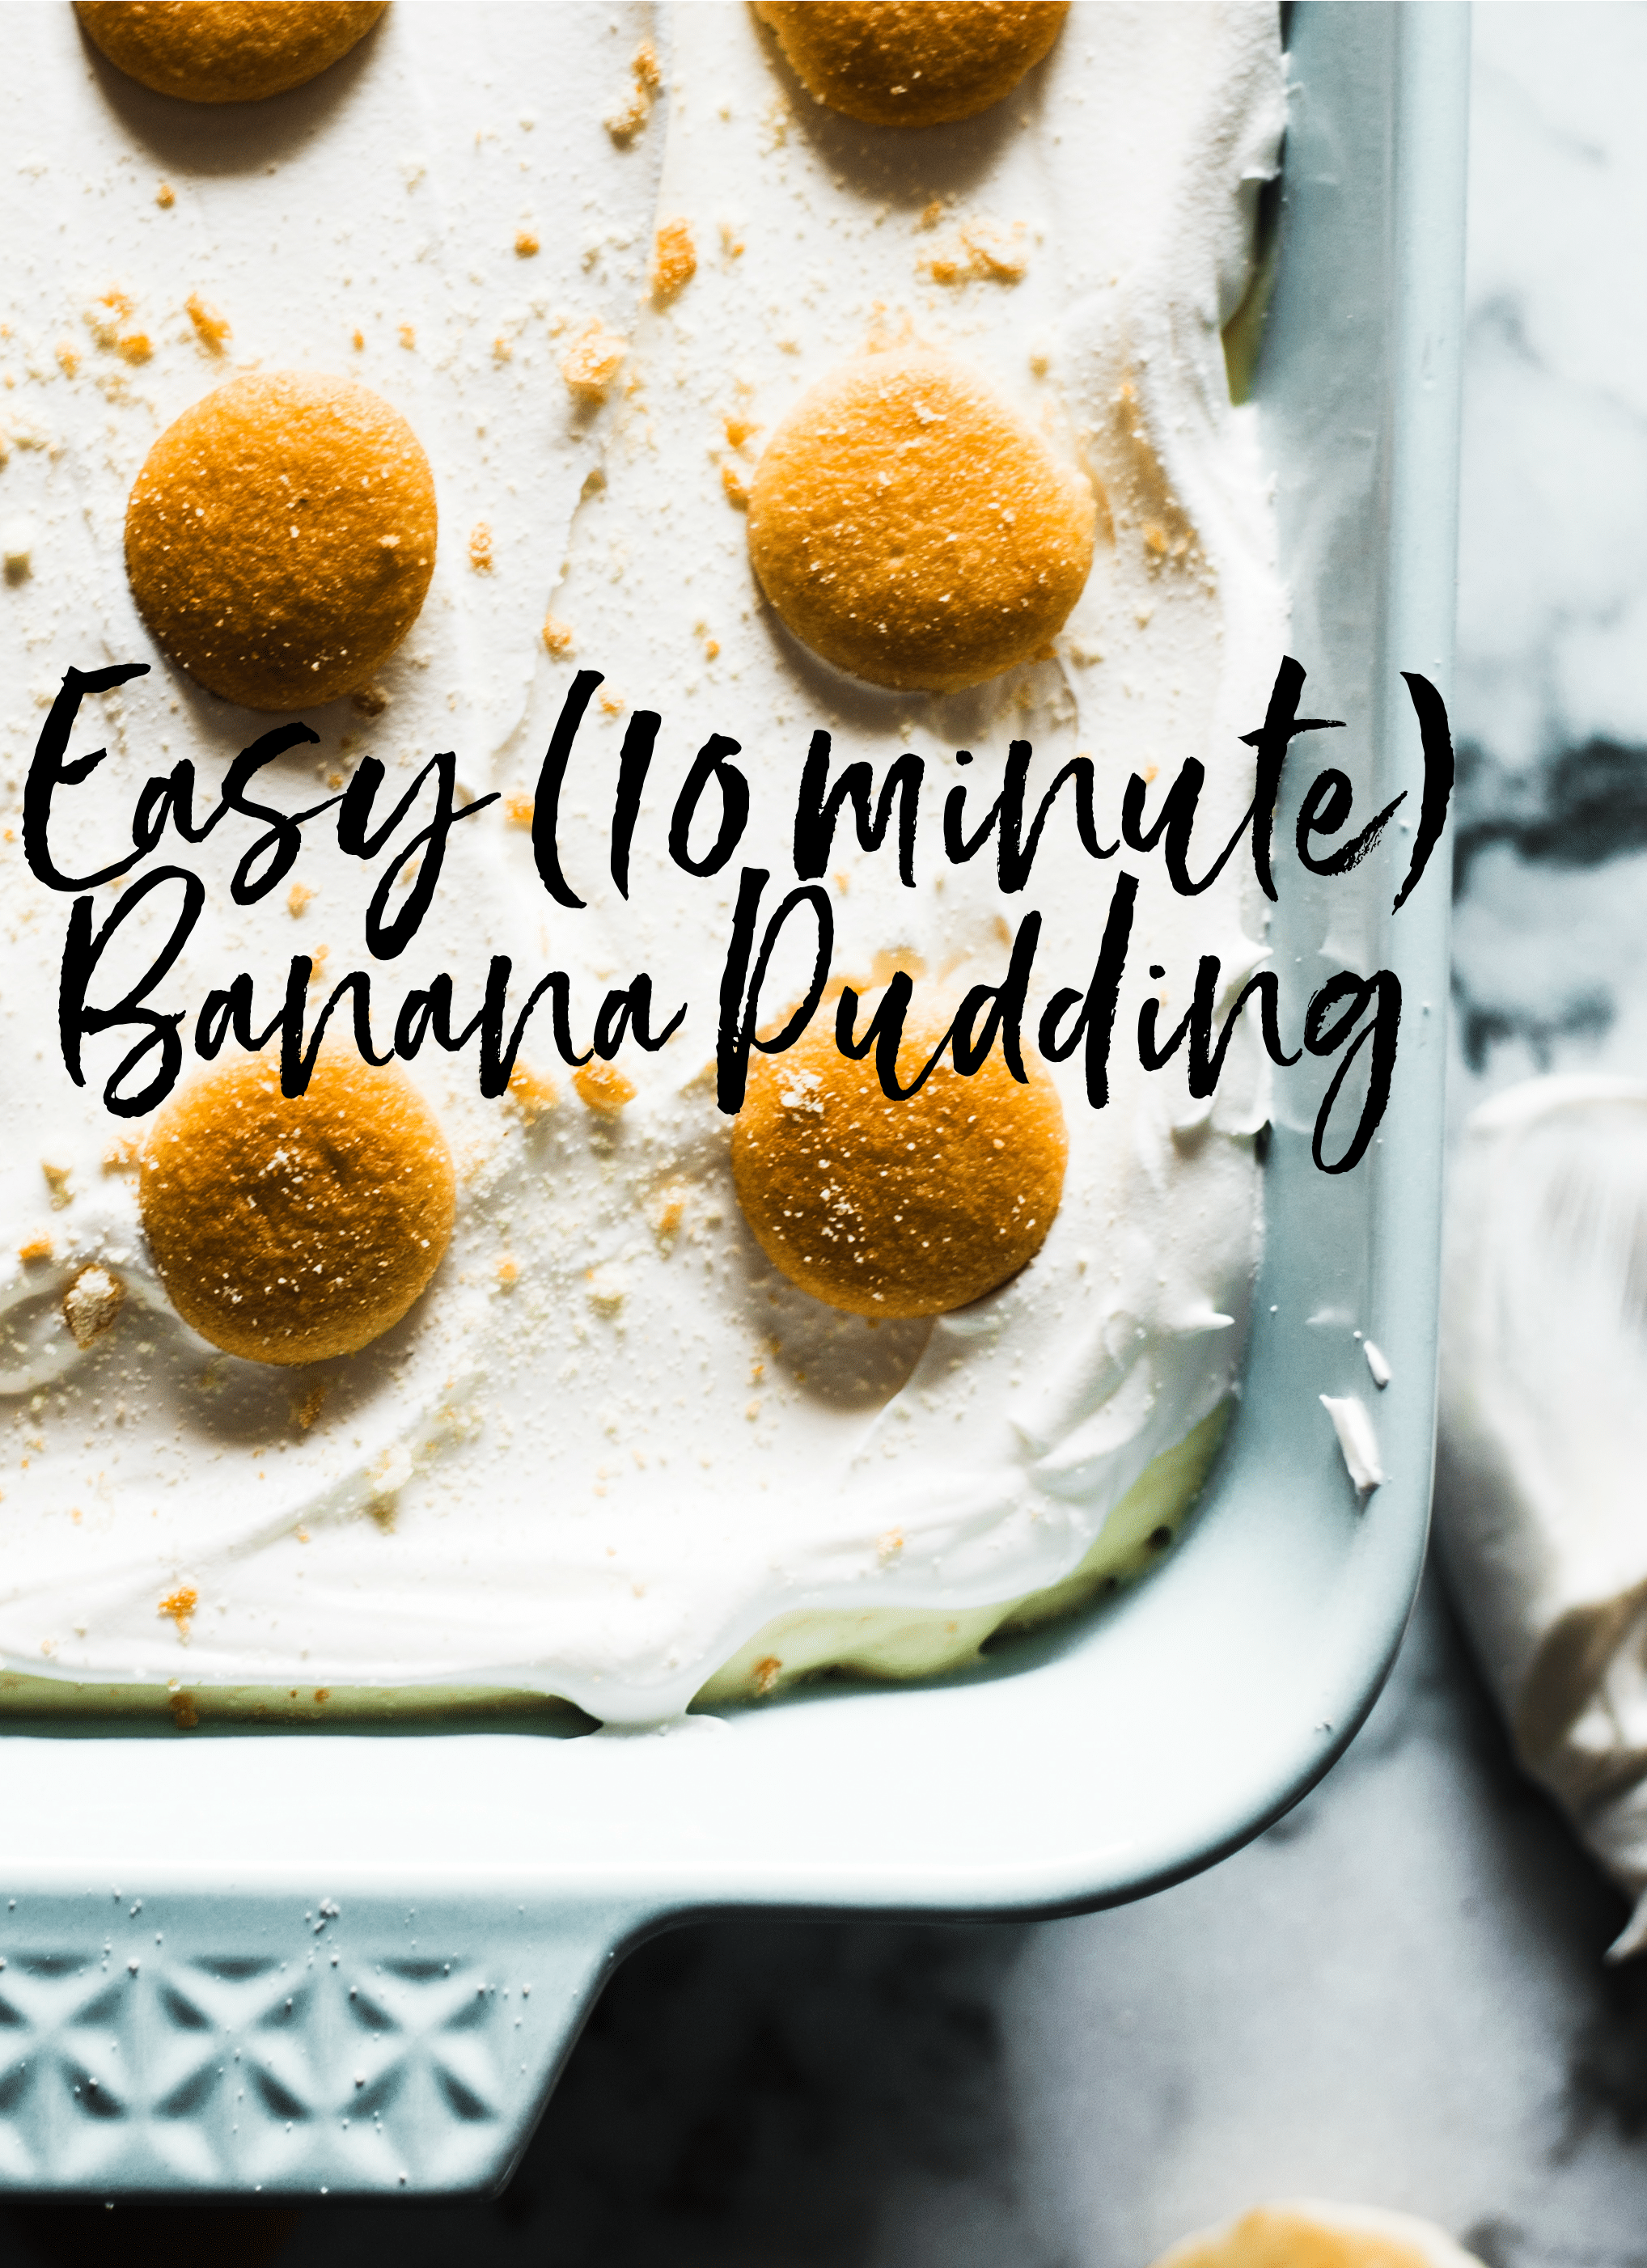 Easy 10 Minute Banana Pudding - image with text